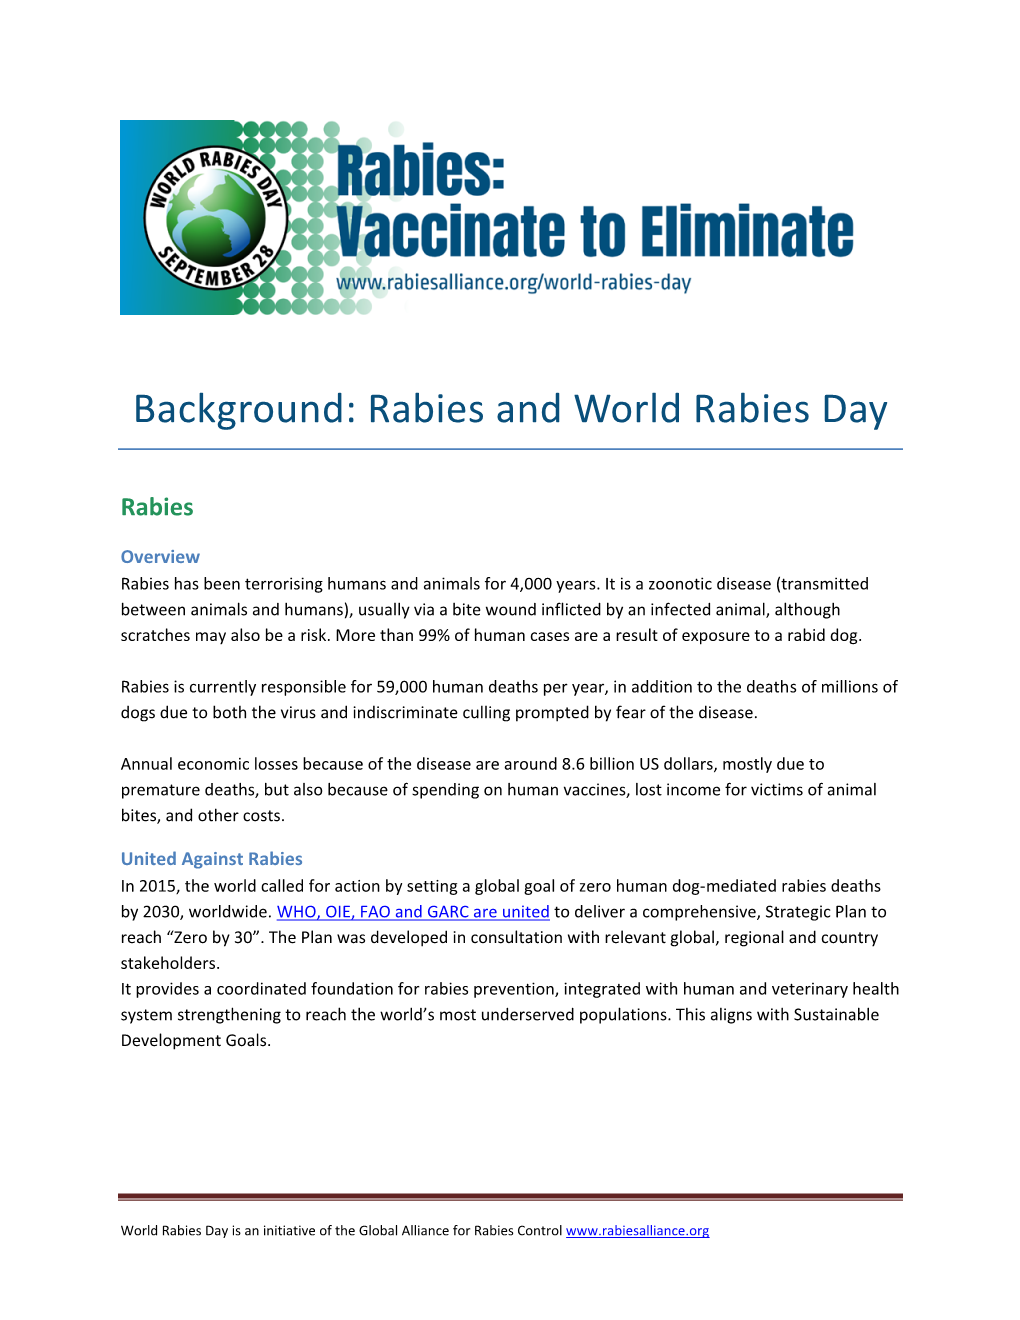 Background: Rabies and World Rabies Day